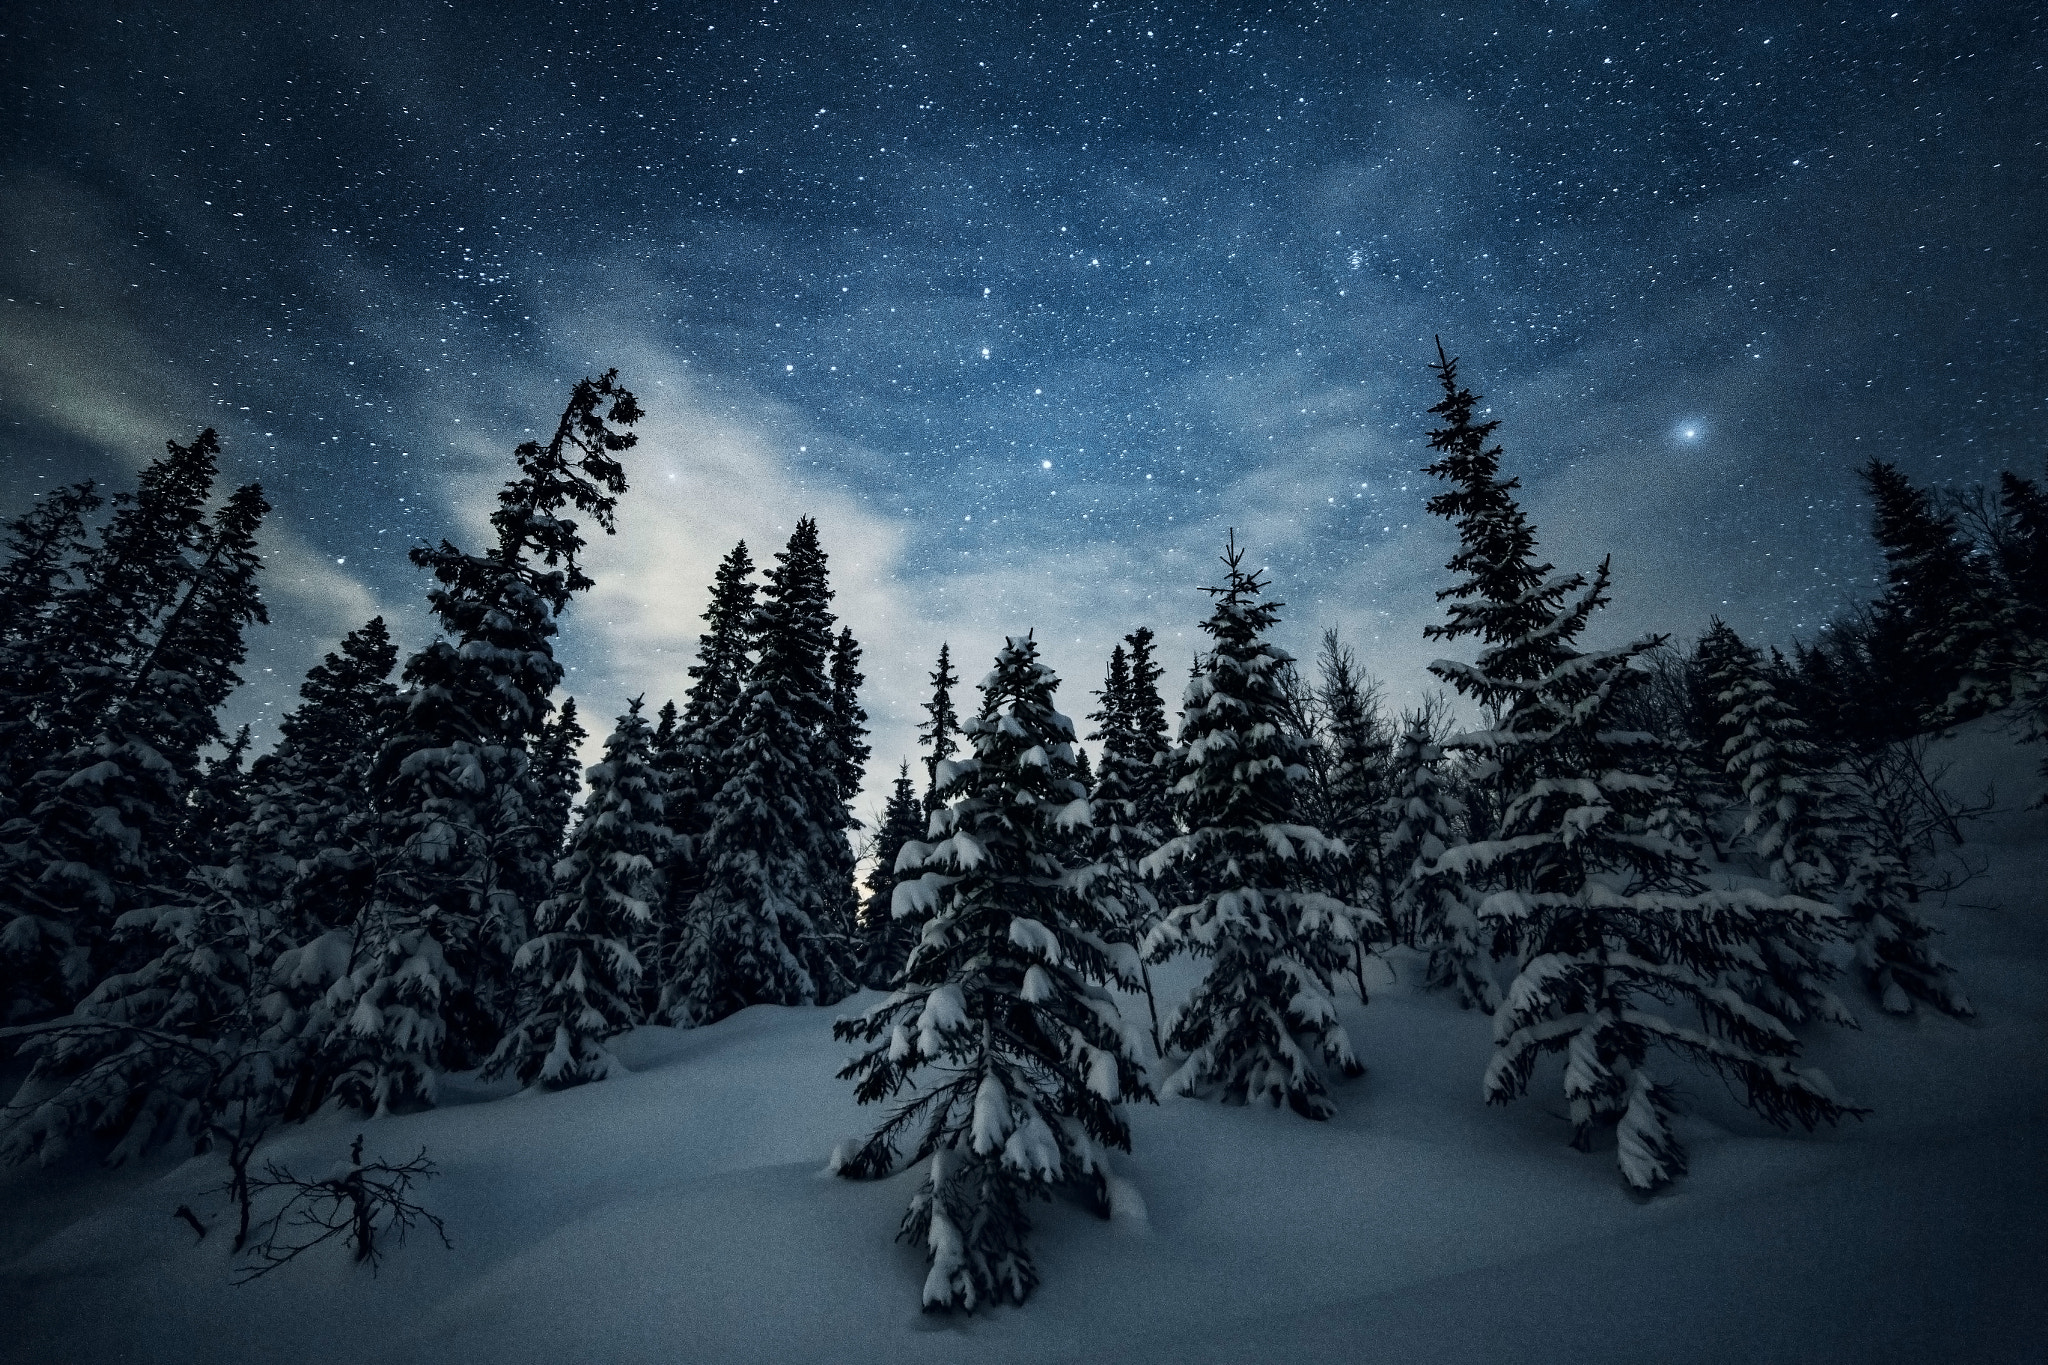 Night Sky at Winter Forest